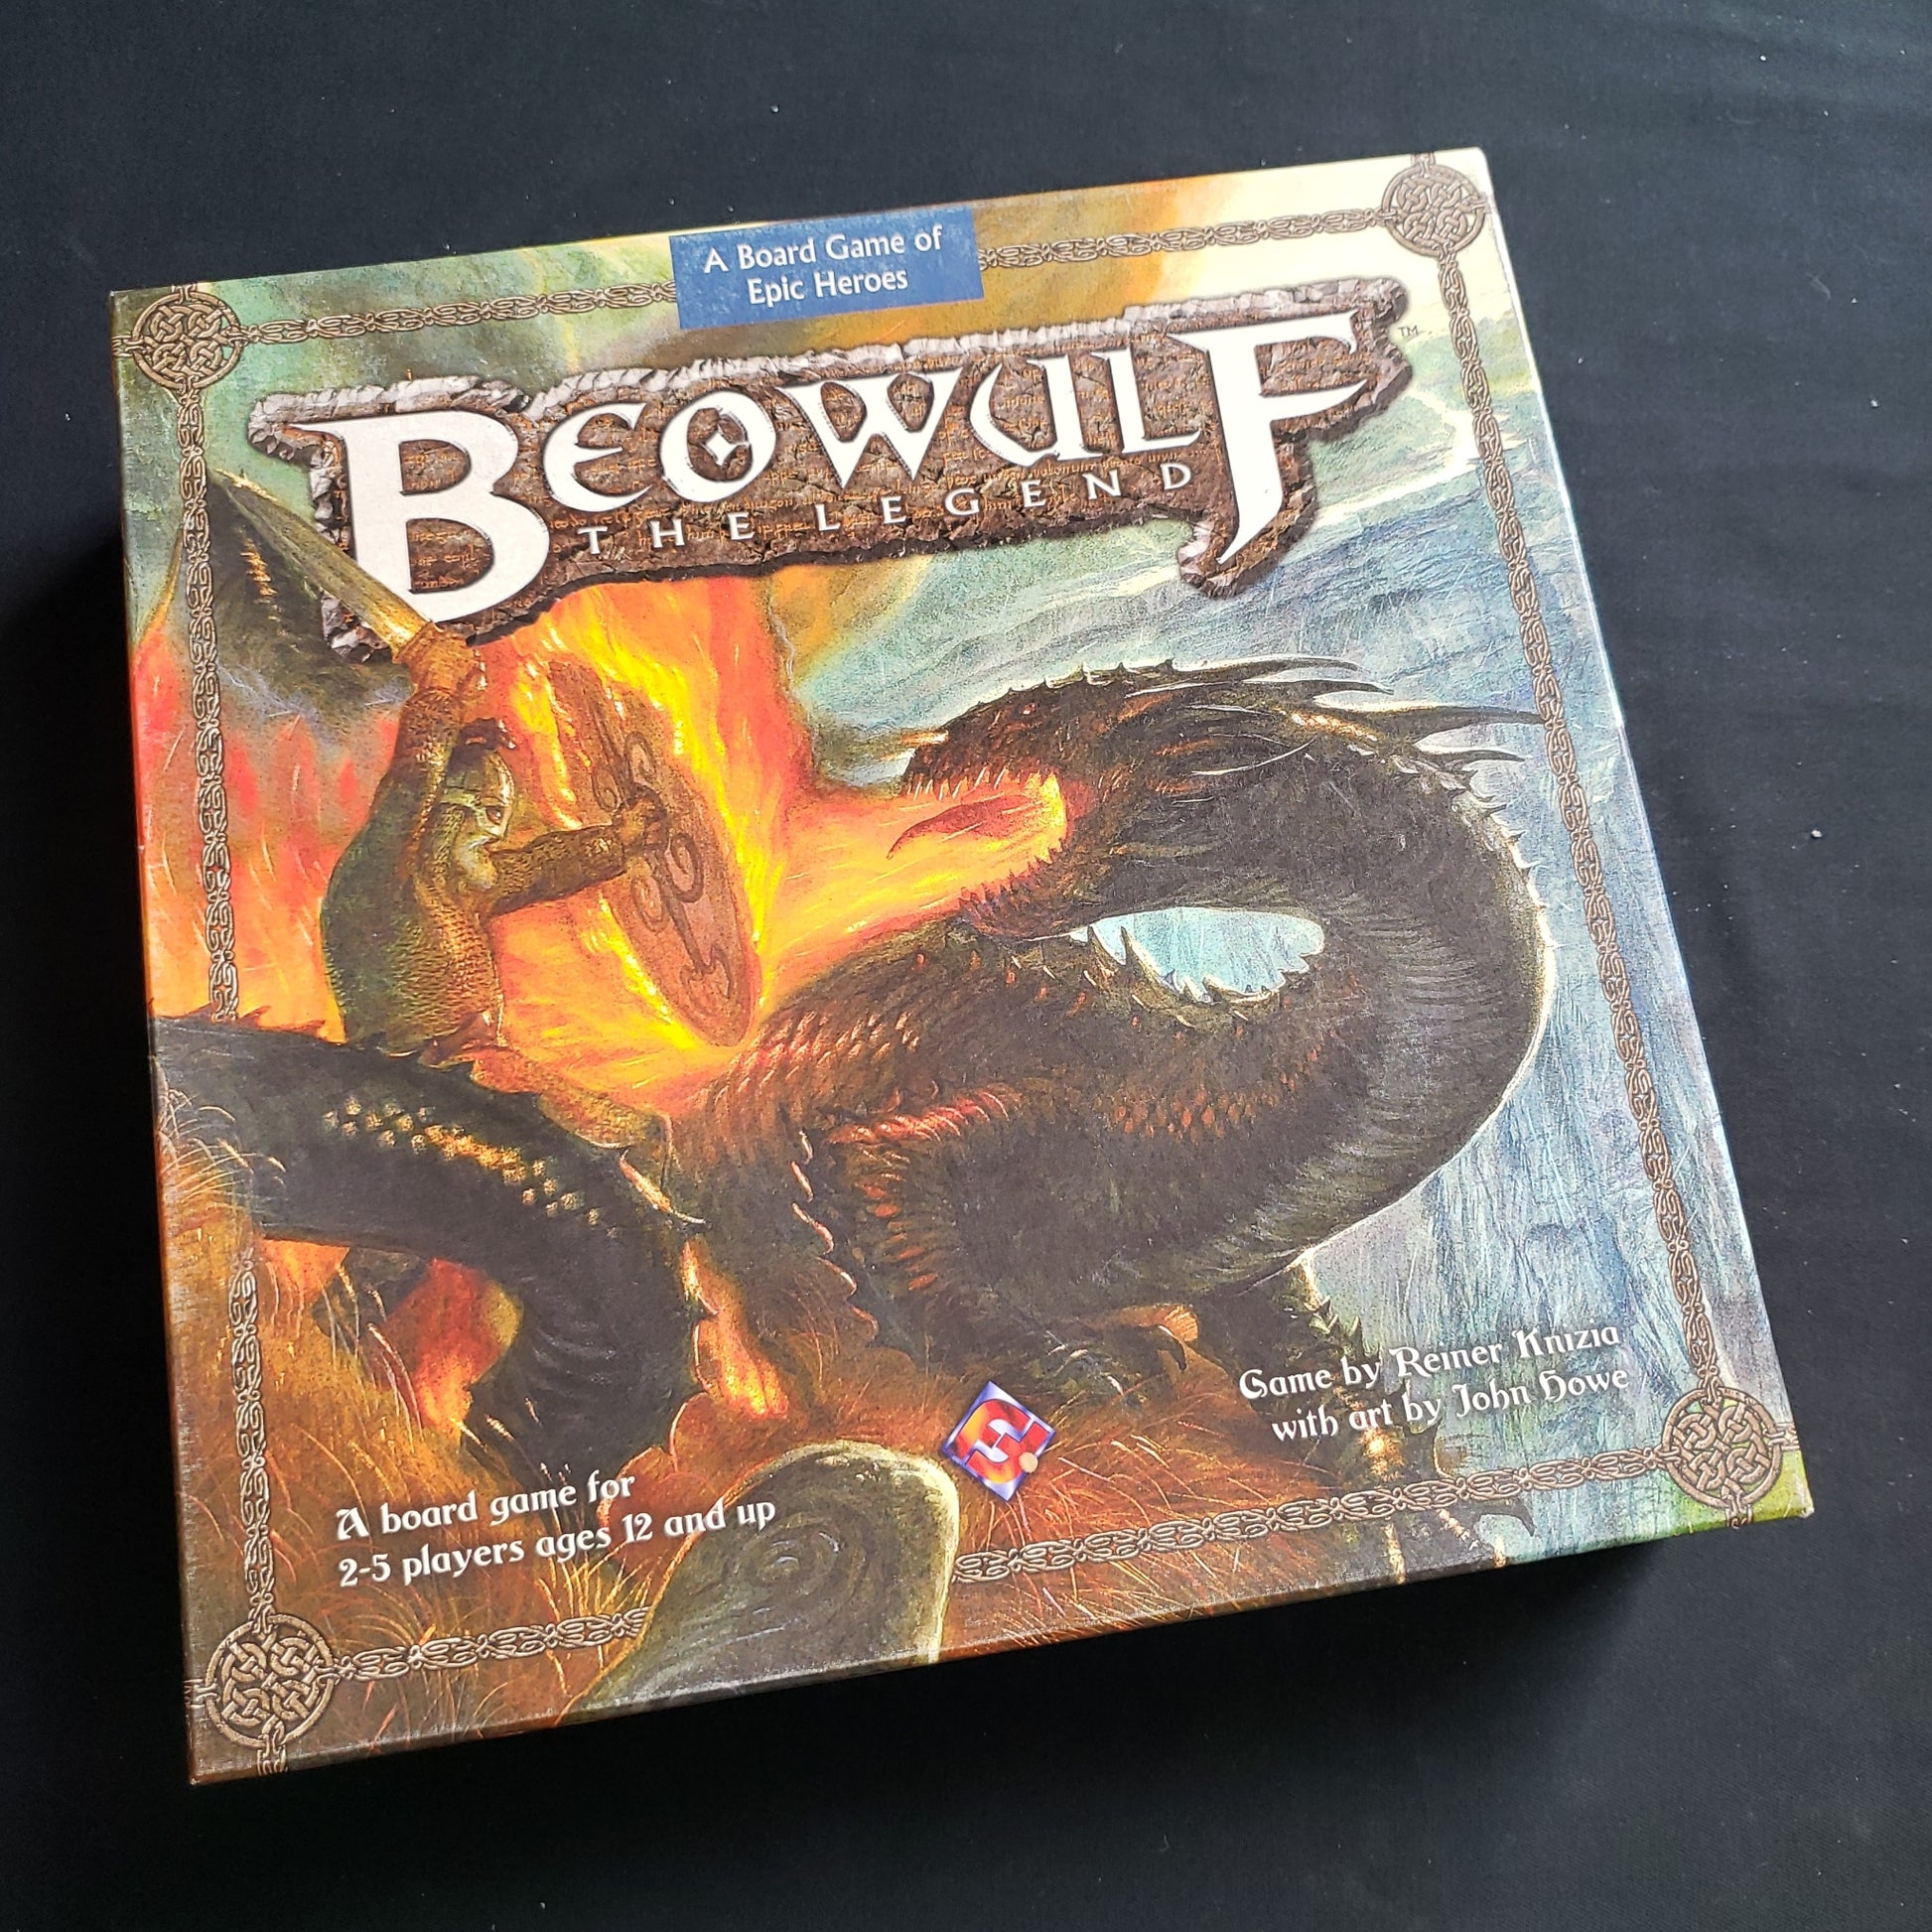 Image shows the front cover of the box of the Beowulf: The Legend board game